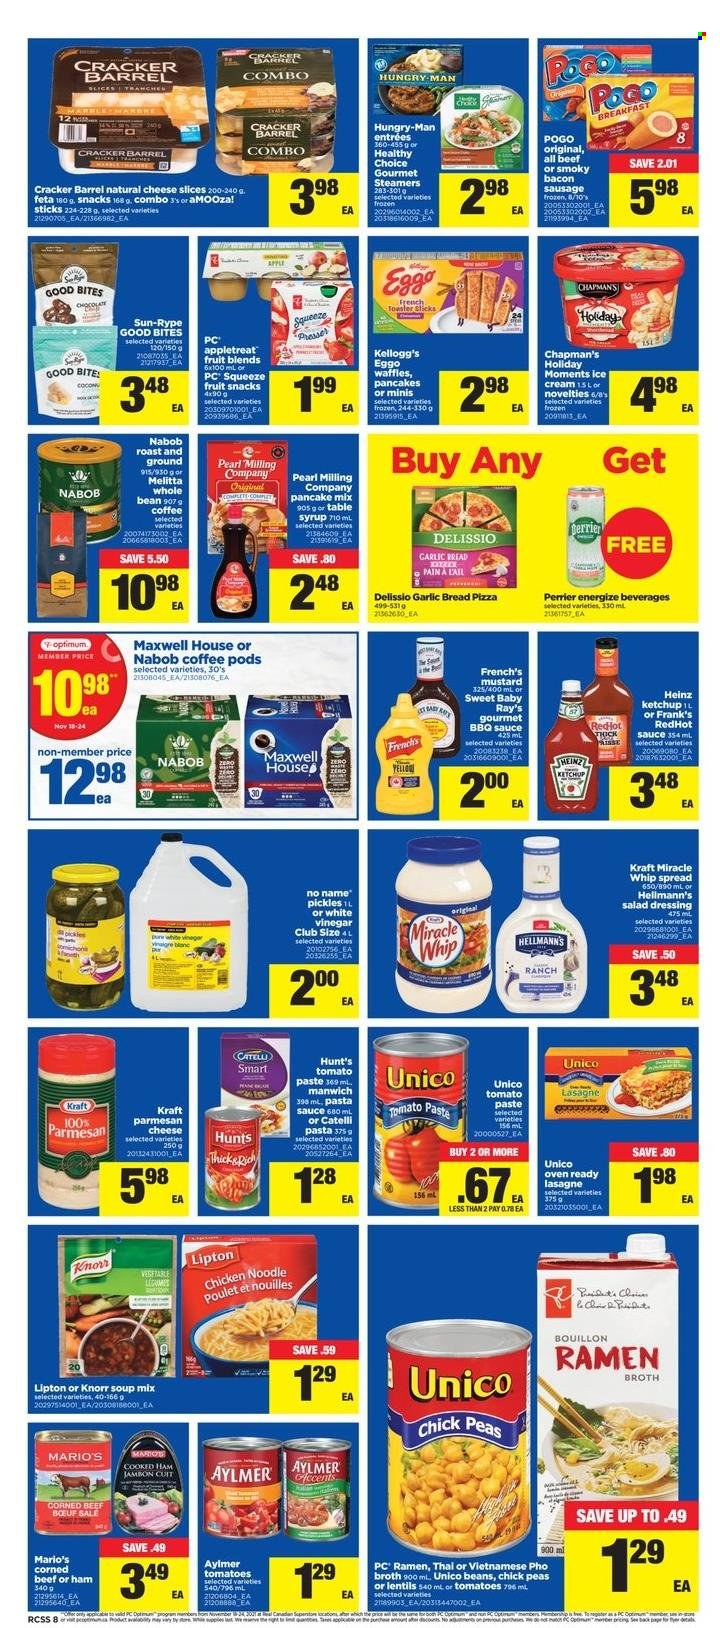 thumbnail - Real Canadian Superstore Flyer - November 18, 2021 - November 24, 2021 - Sales products - bread, waffles, peas, No Name, ramen, pizza, pasta sauce, soup mix, soup, sauce, noodles, lasagna meal, Healthy Choice, Kraft®, bacon, cooked ham, sausage, corned beef, sliced cheese, parmesan, feta, Miracle Whip, Hellmann’s, crackers, Kellogg's, fruit snack, bouillon, broth, lentils, tomato paste, Heinz, pickles, Manwich, BBQ sauce, mustard, salad dressing, dressing, vinegar, syrup, Perrier, Maxwell House, coffee pods, beef meat, Optimum, Moments, table, Knorr, ketchup, Lipton, toaster. Page 8.